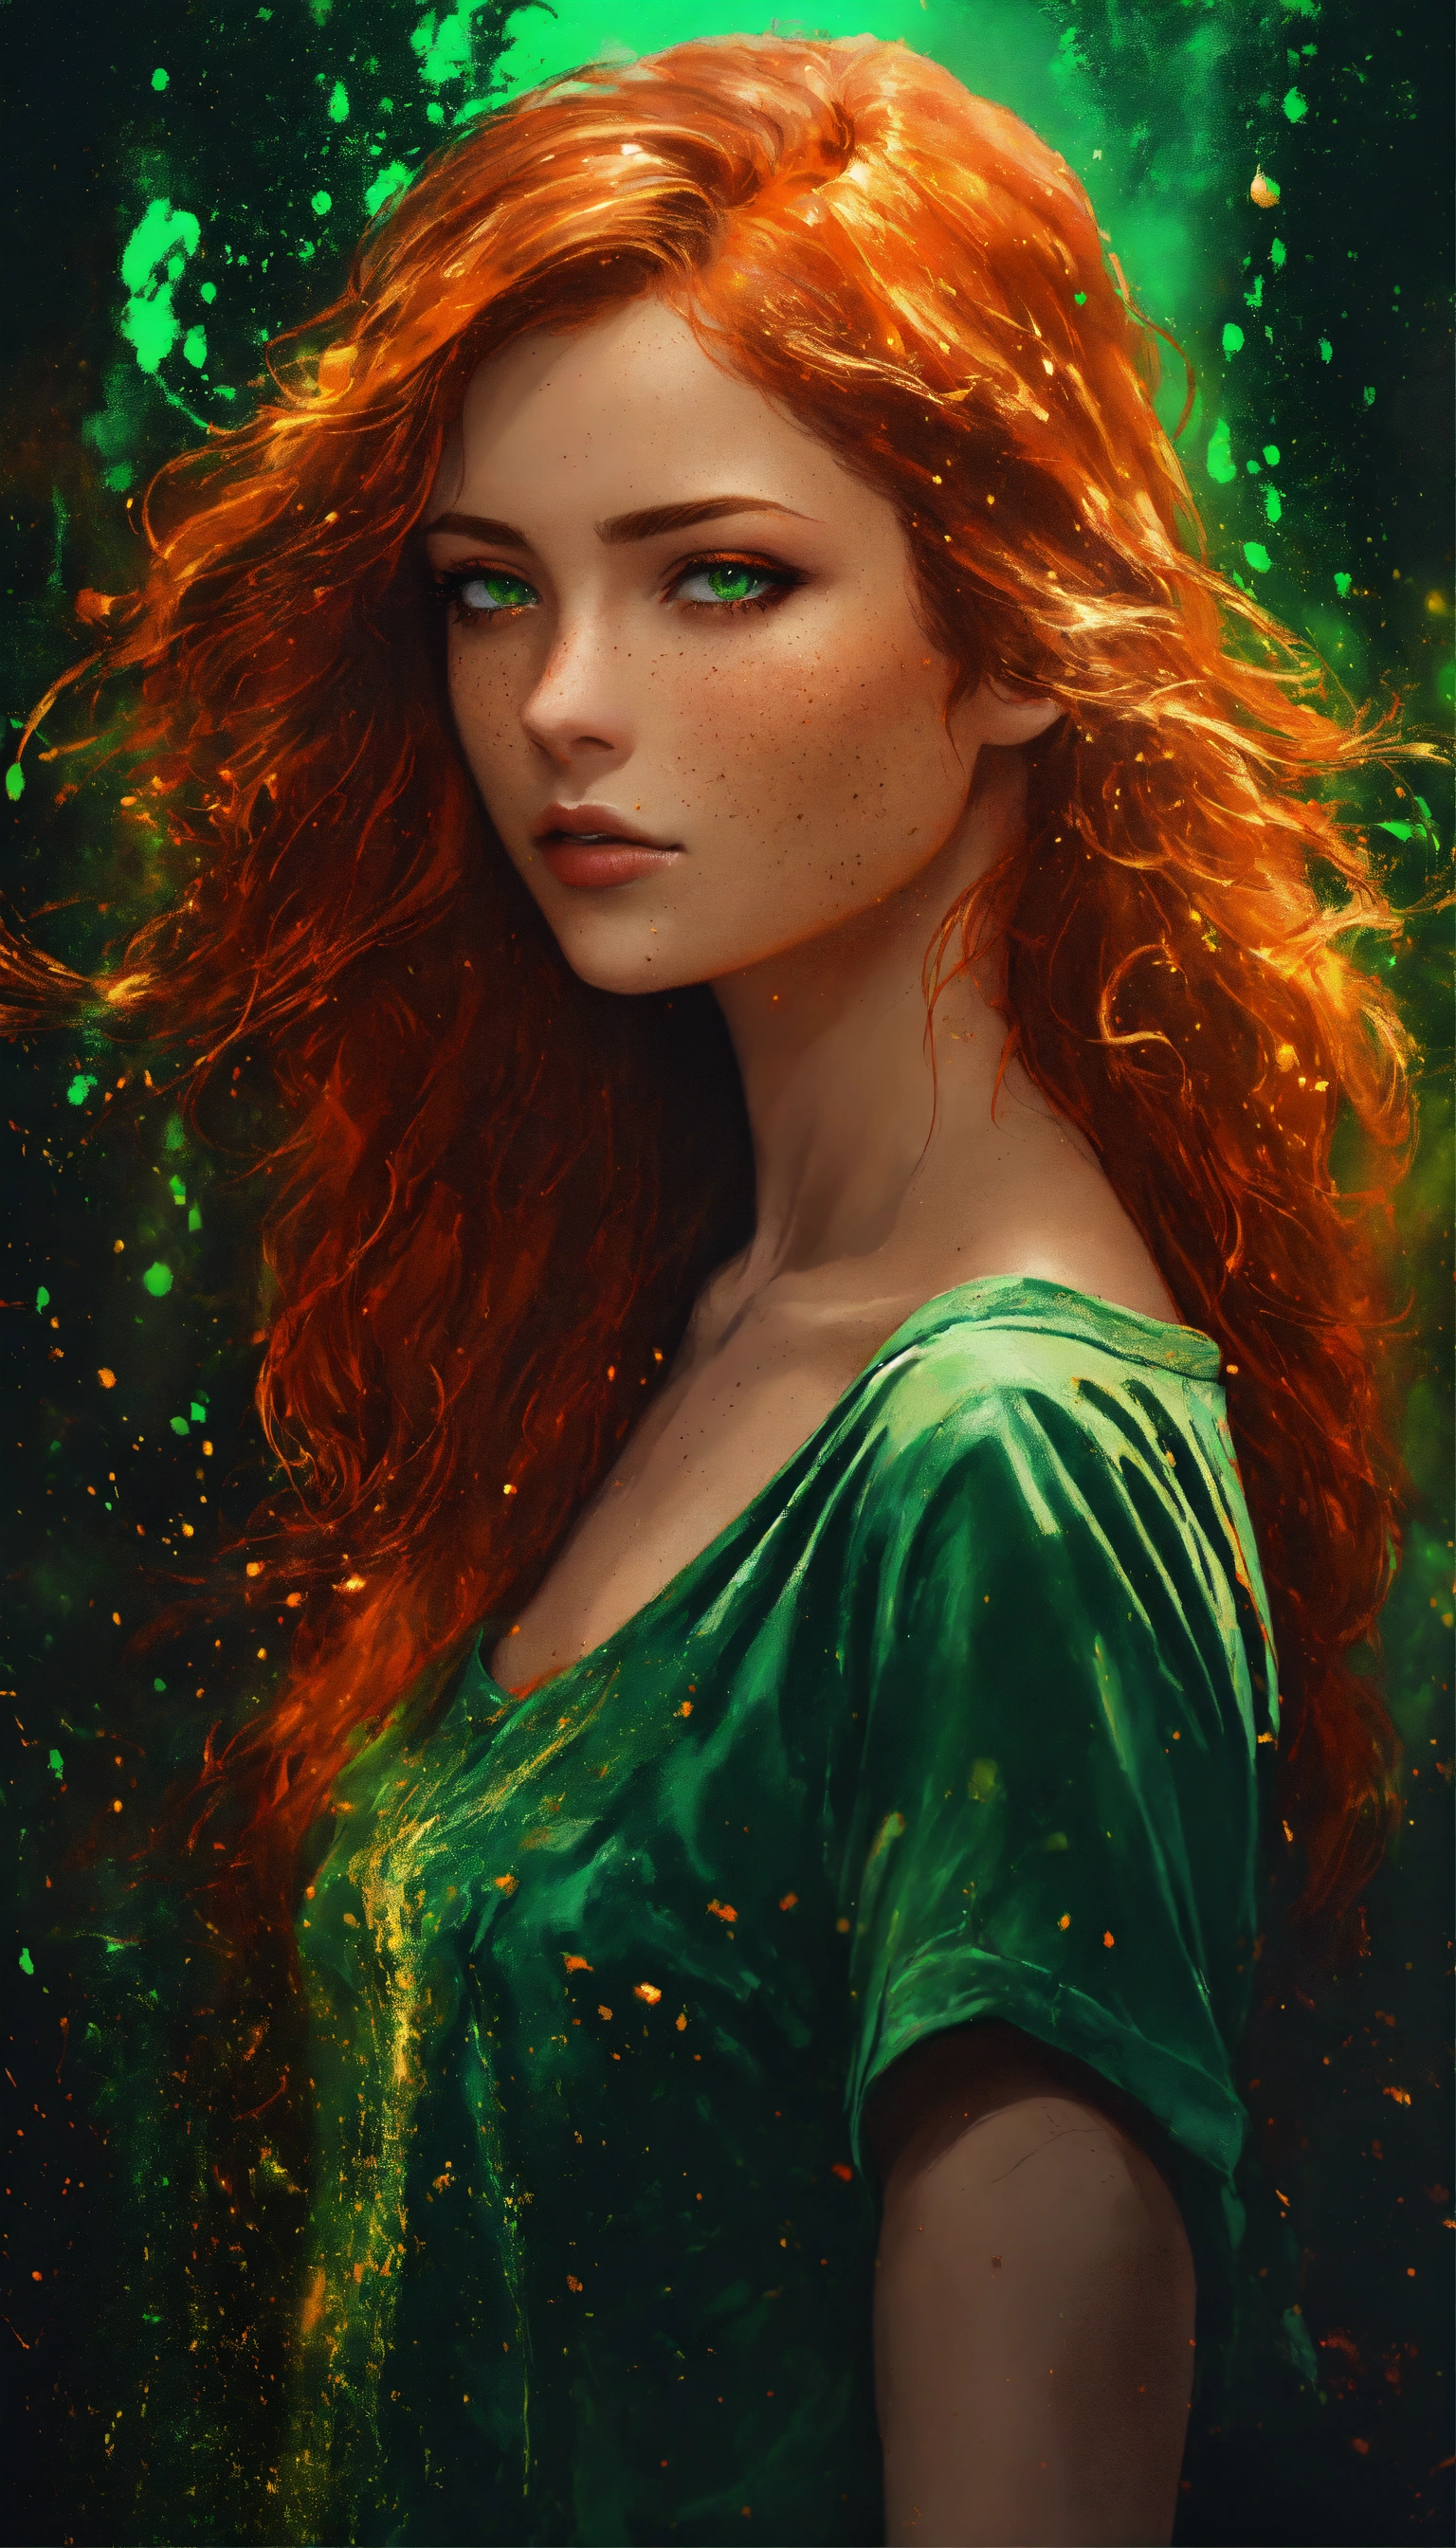 Lexica A Beautiful Red Head Woman With Green Eyes Facing Away But 